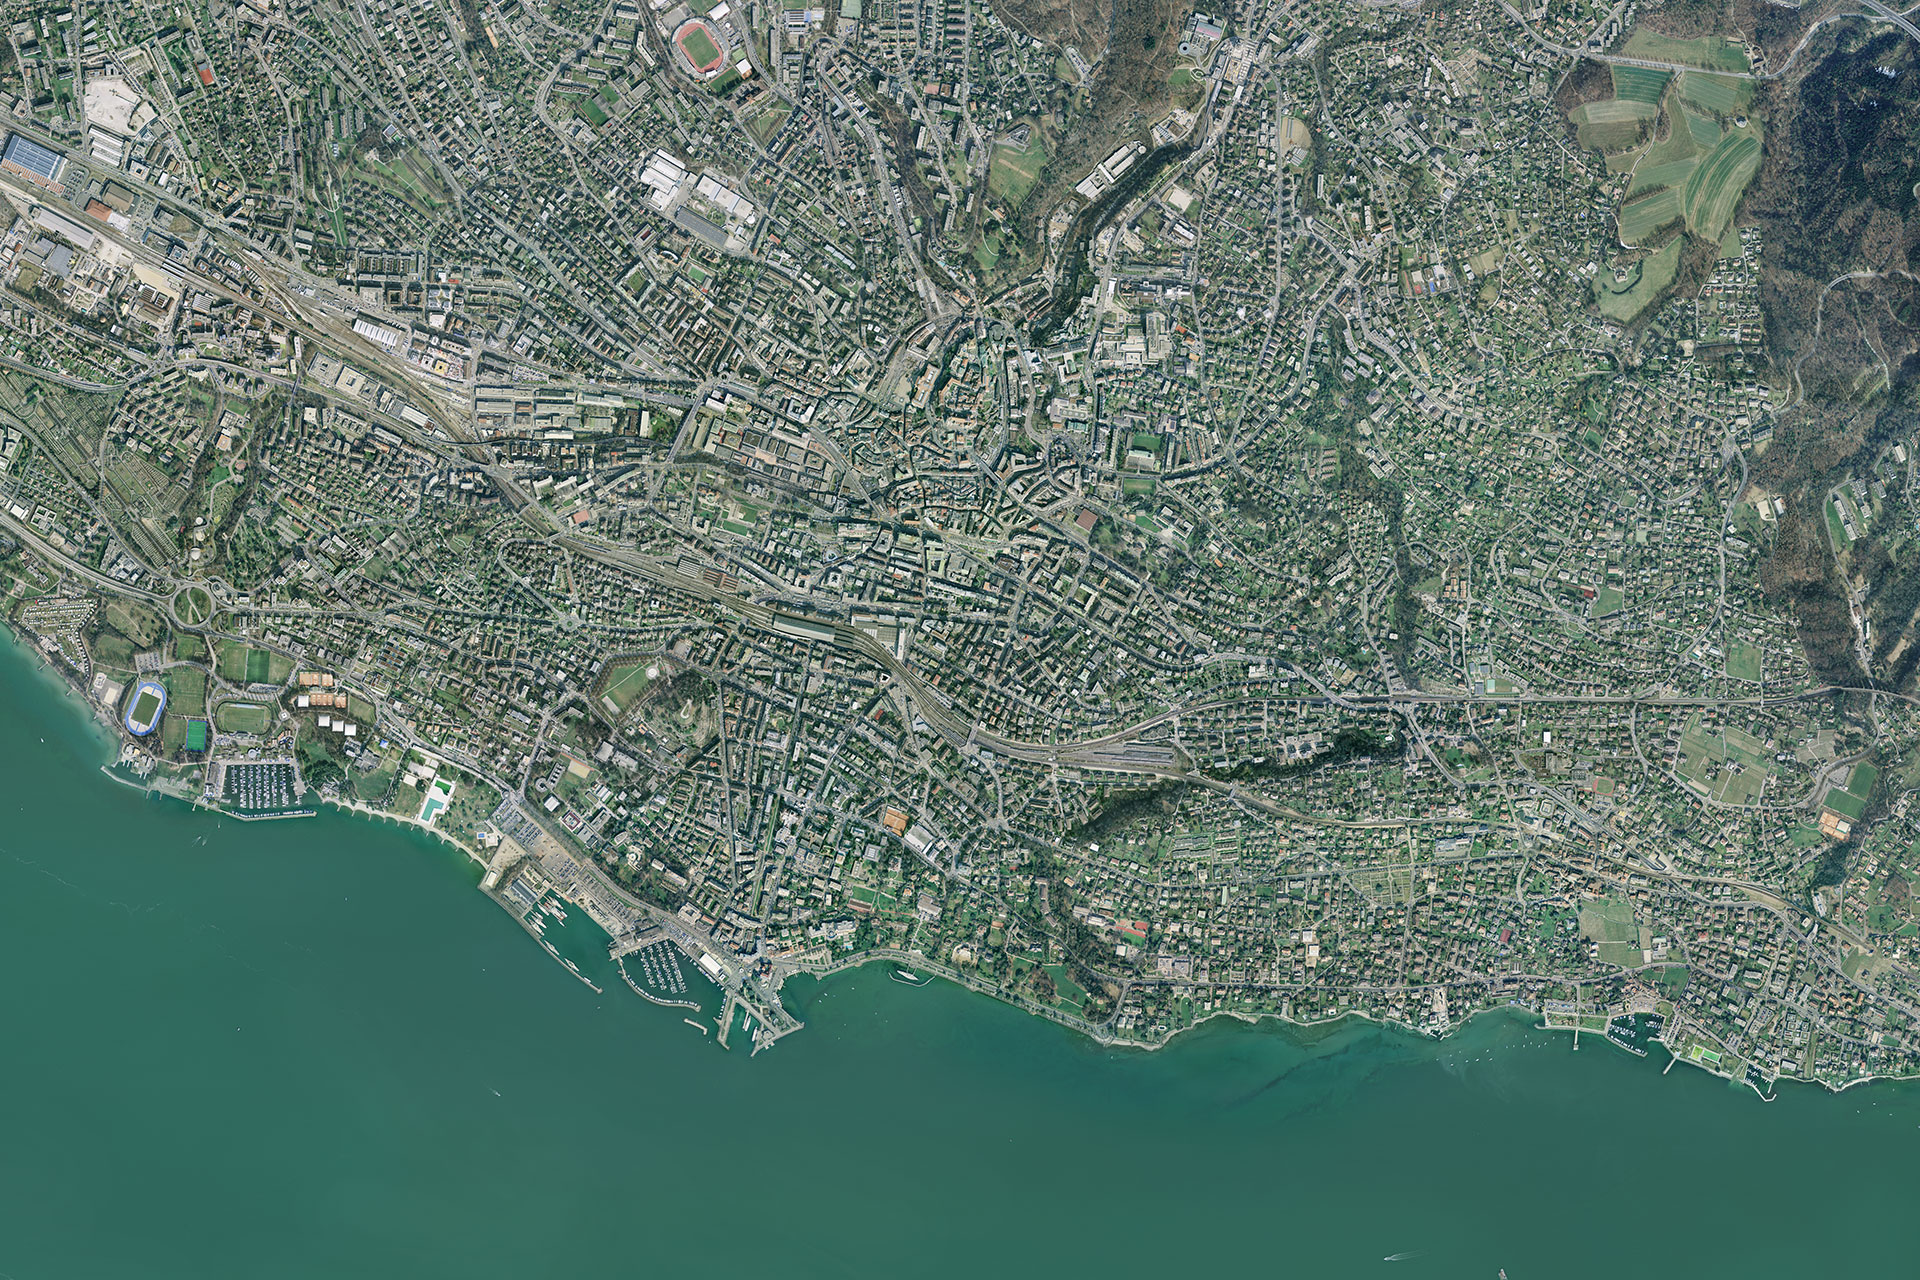 <strong>1,300,000 MEGAWATT HOURS: LAUSANNE </strong>1,300,000 MWh energy consumption (2/2): The city of Lausanne uses the same amount of energy as the Large Hadron Collider at CERN. While the population and businesses are encouraged to save electricity, physicists are dreaming of what they can do with even more. Image: Reproduced with permission of swisstopo (BA18106)